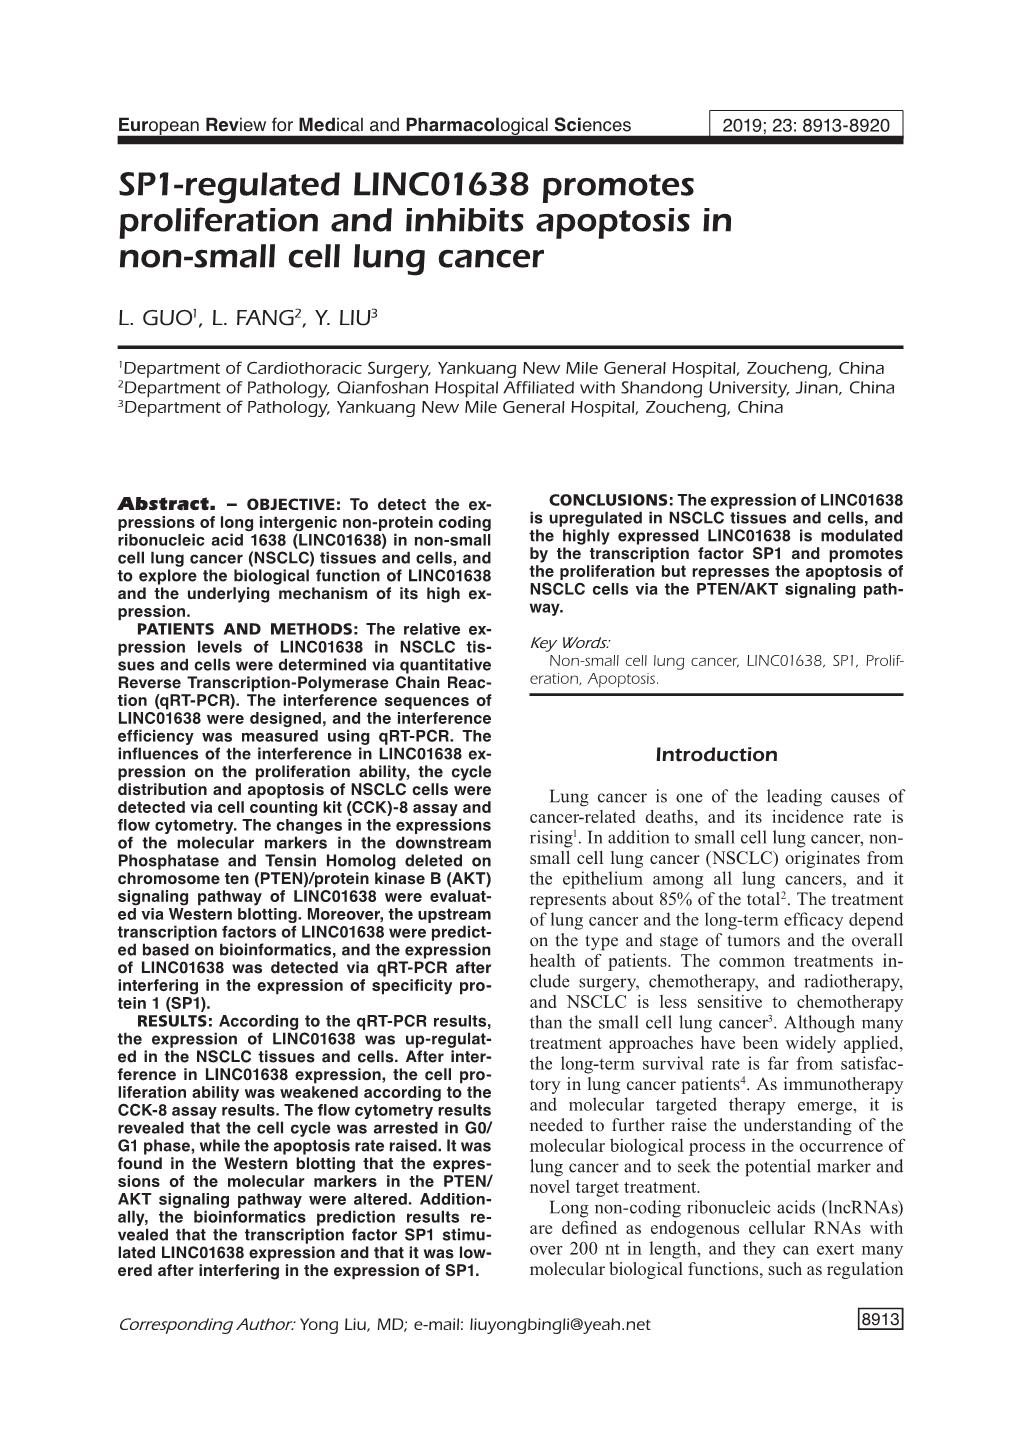 SP1-Regulated LINC01638 Promotes Proliferation and Inhibits Apoptosis in Non-Small Cell Lung Cancer